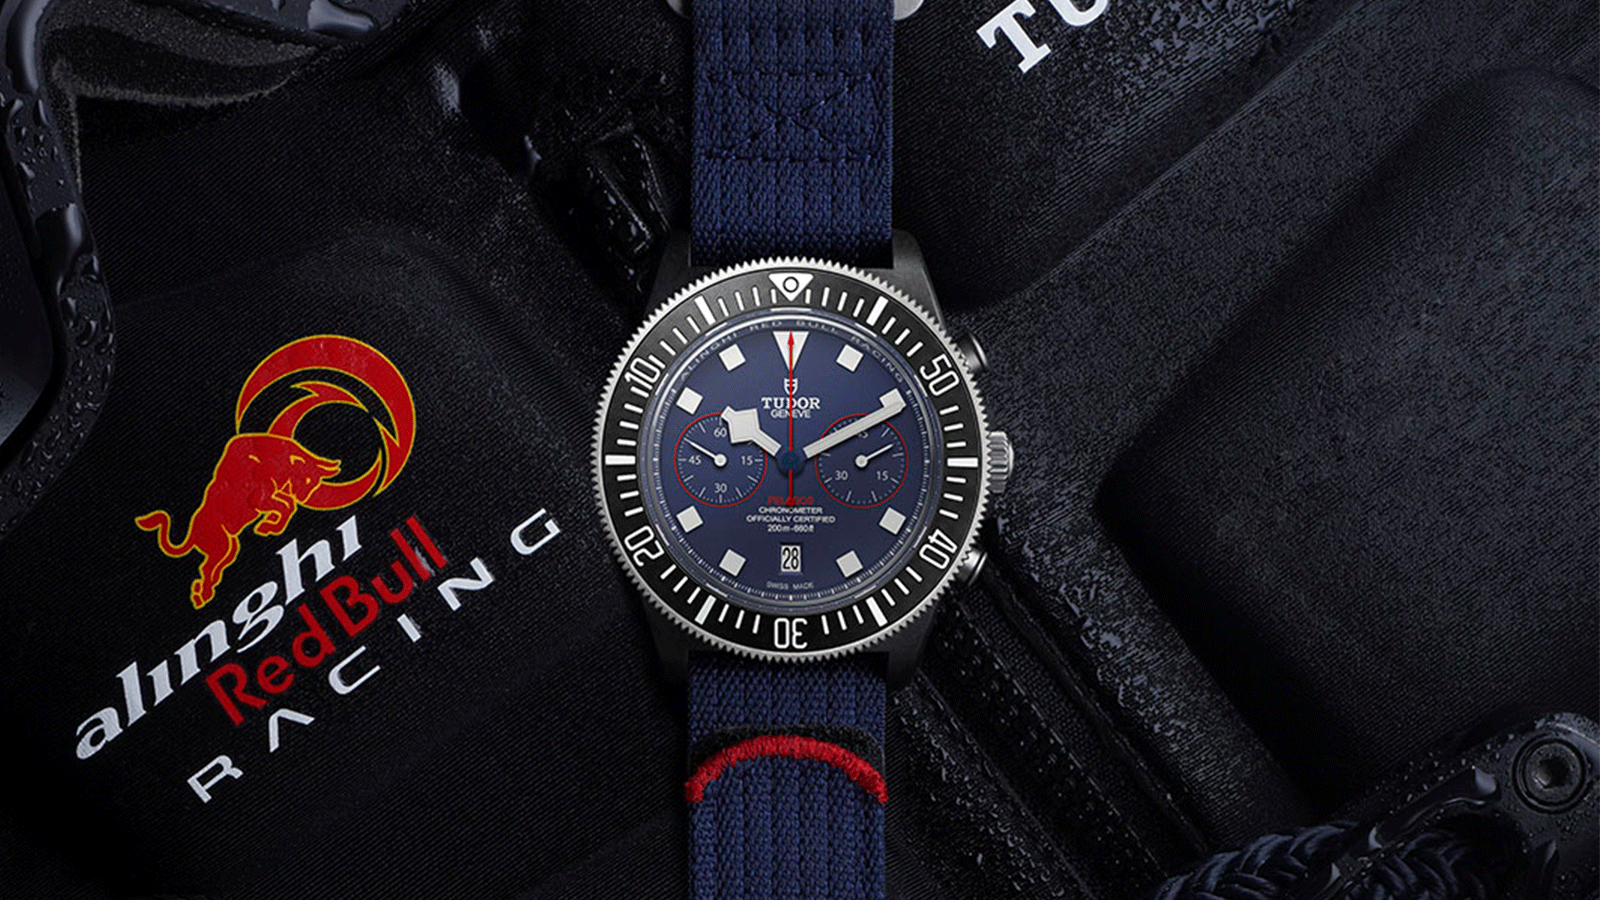 The Pelagos FXD Chrono "Alinghi Red Bull Racing Edition" is made for the ultimate racing competitions.